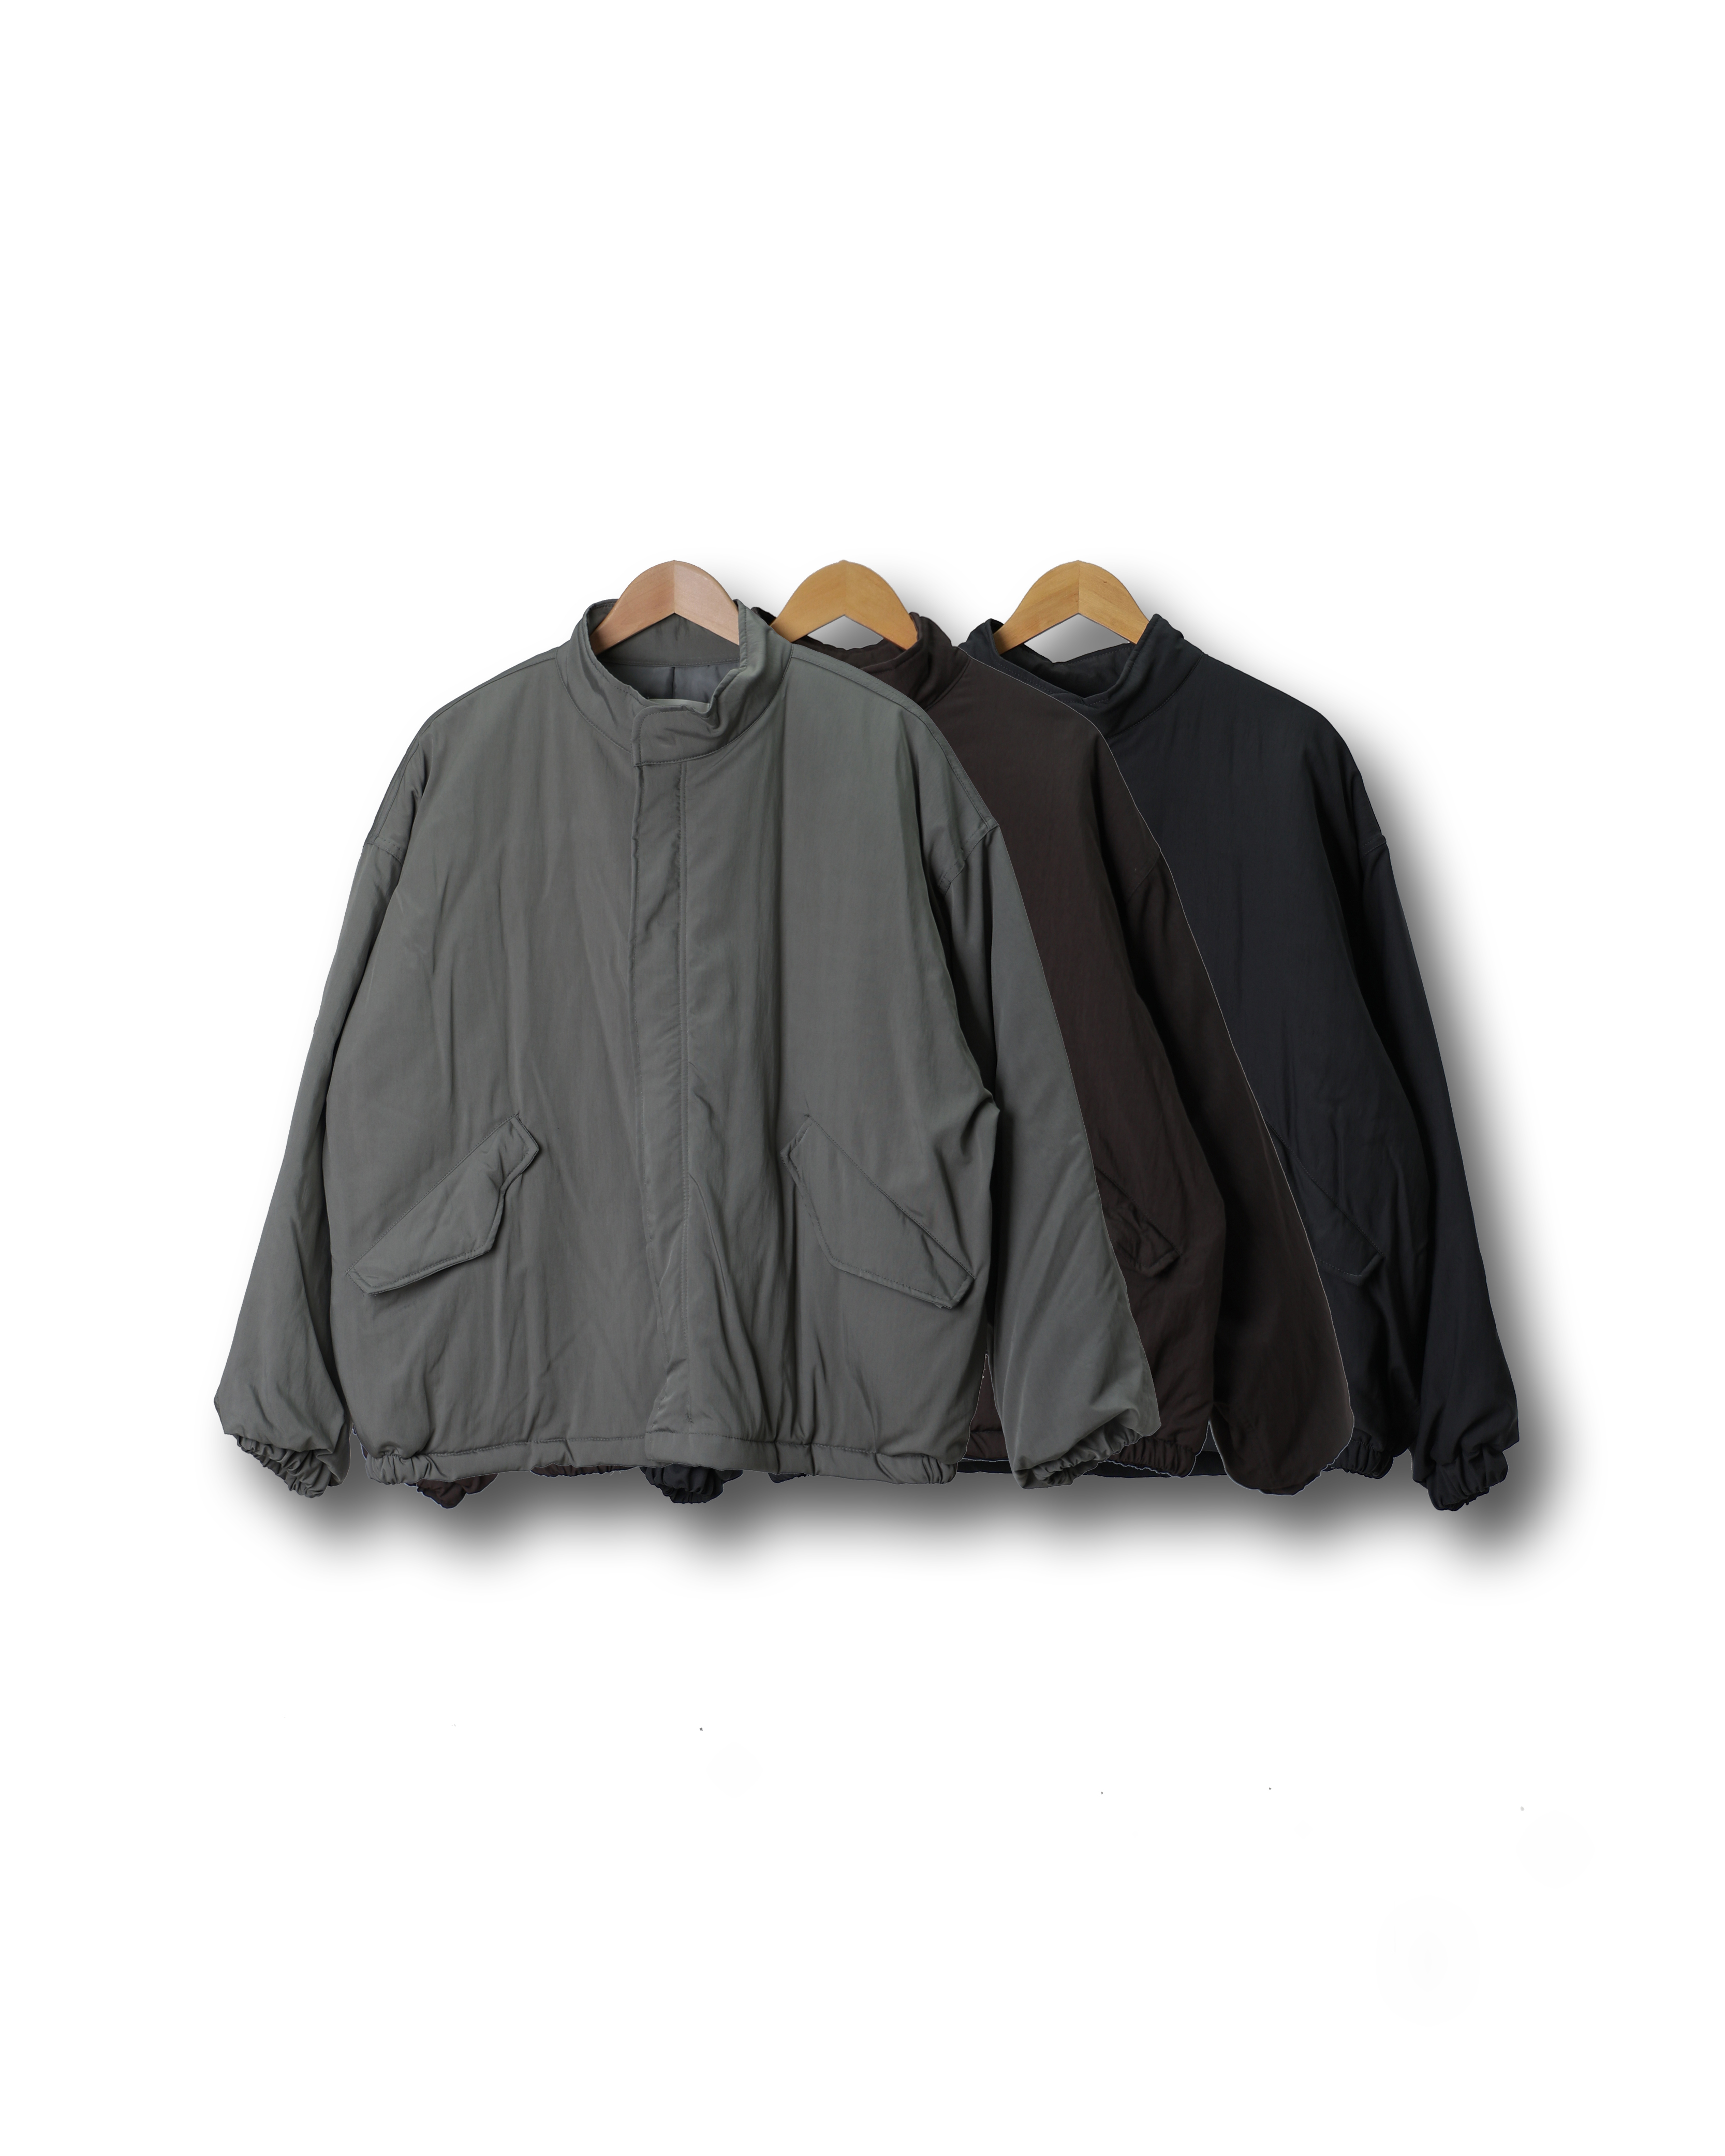 MOCOS M-65 Fishtail Padded Parka (Charcoal/Gray/Brown)